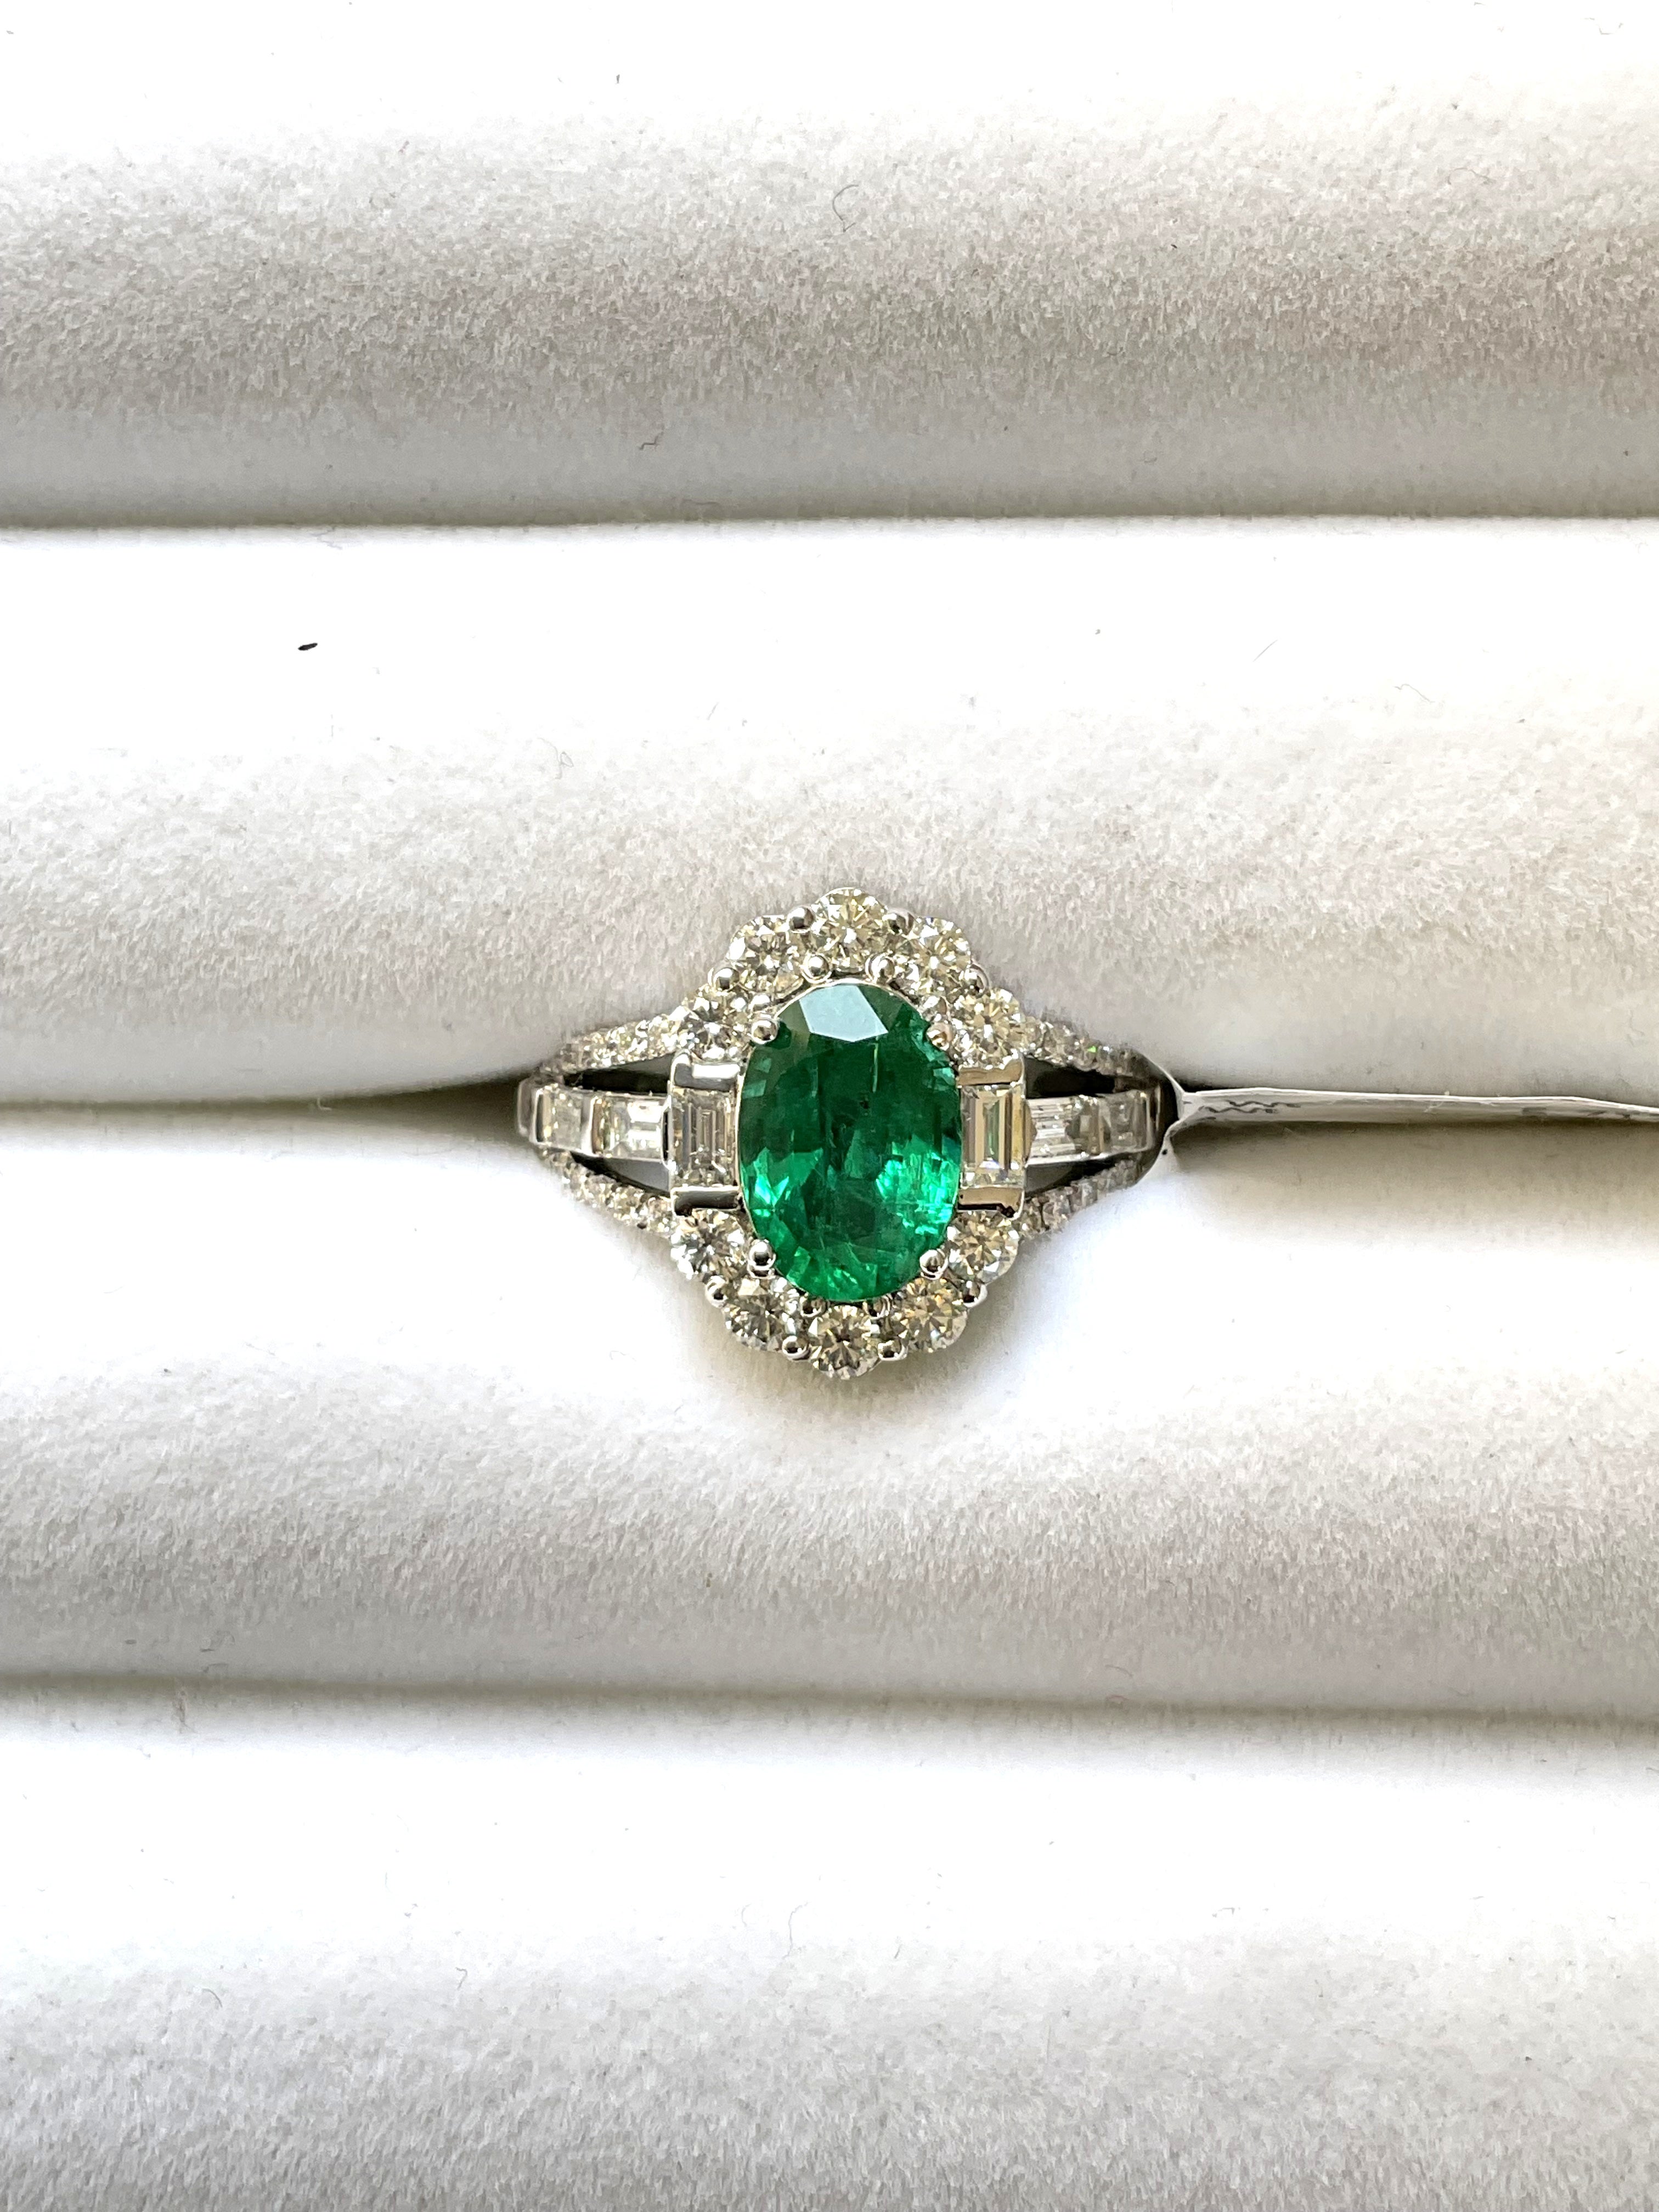 18k Gold Art Deco Zambian Emerald Cocktail Ring 2.05 cts with 1.49 ct Diamonds  For Sale 1